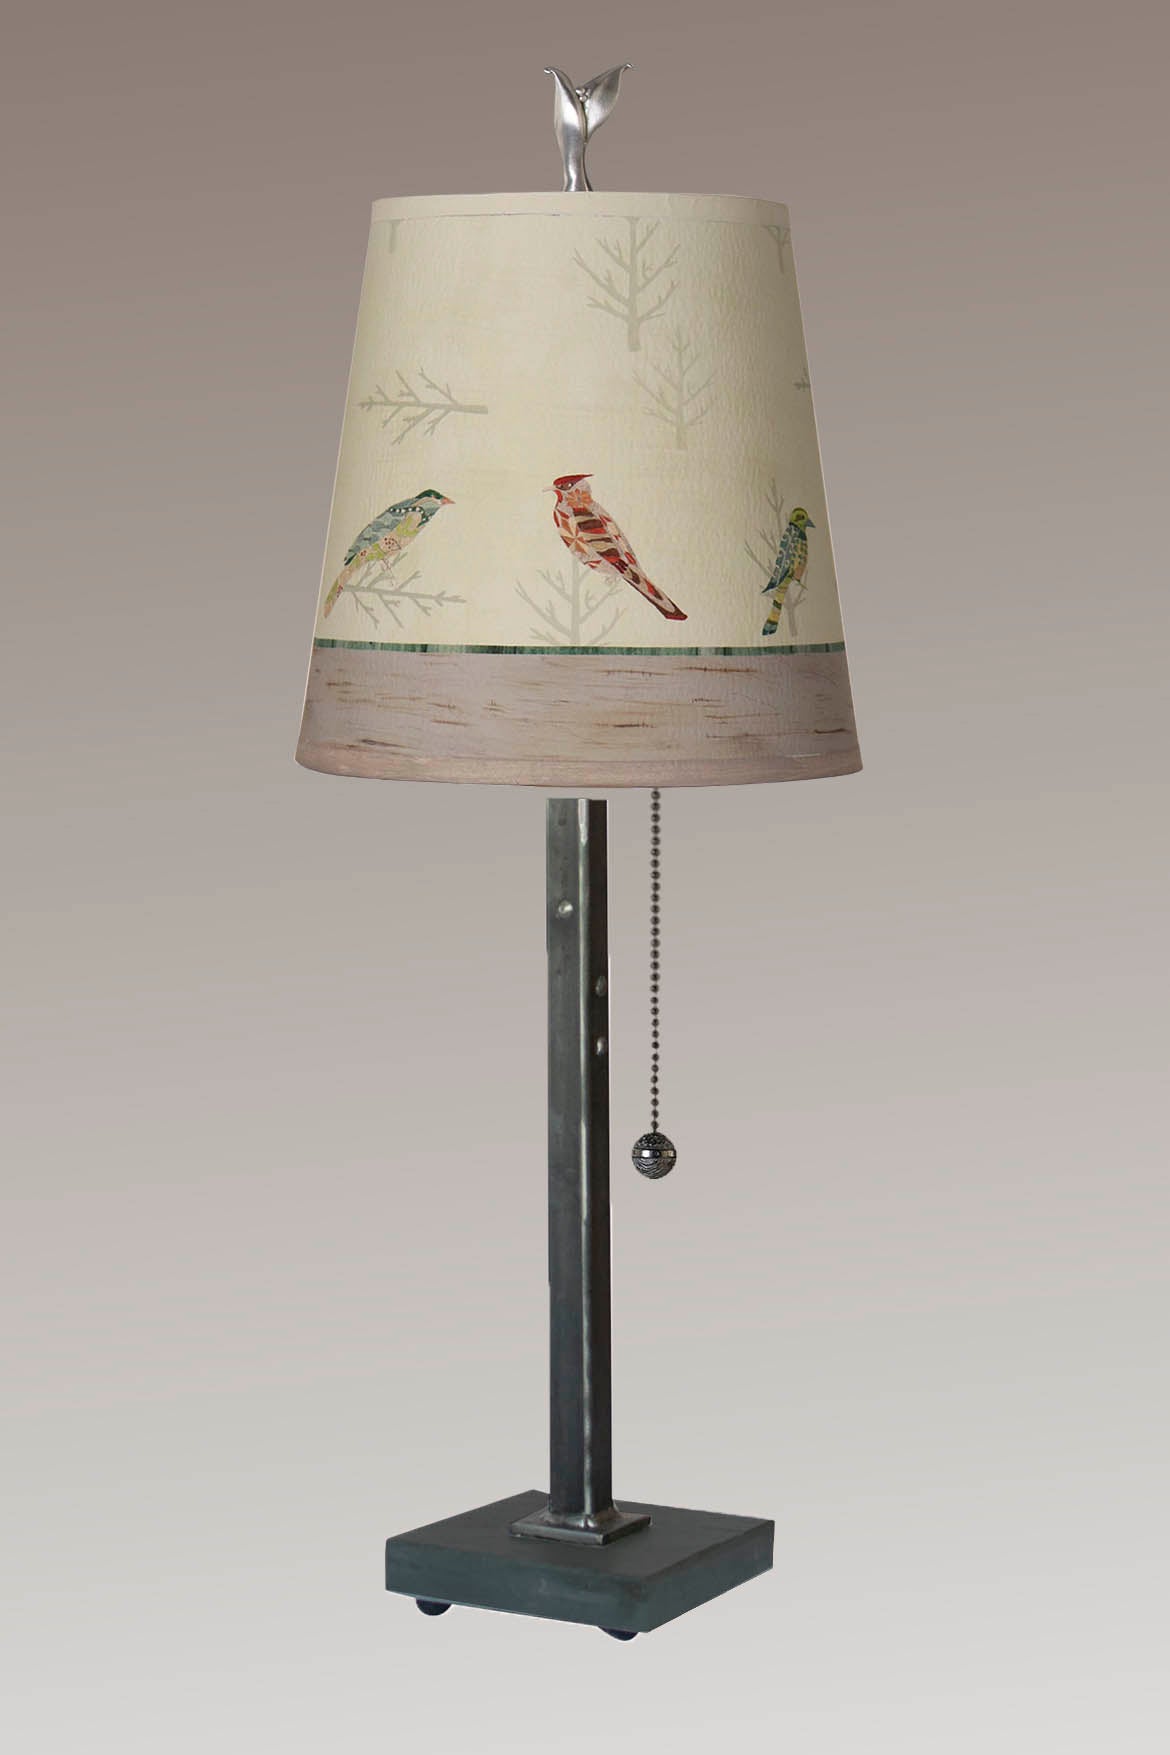 Janna Ugone & Co Table Lamp Steel Table Lamp with Small Drum Shade in Bird Friends